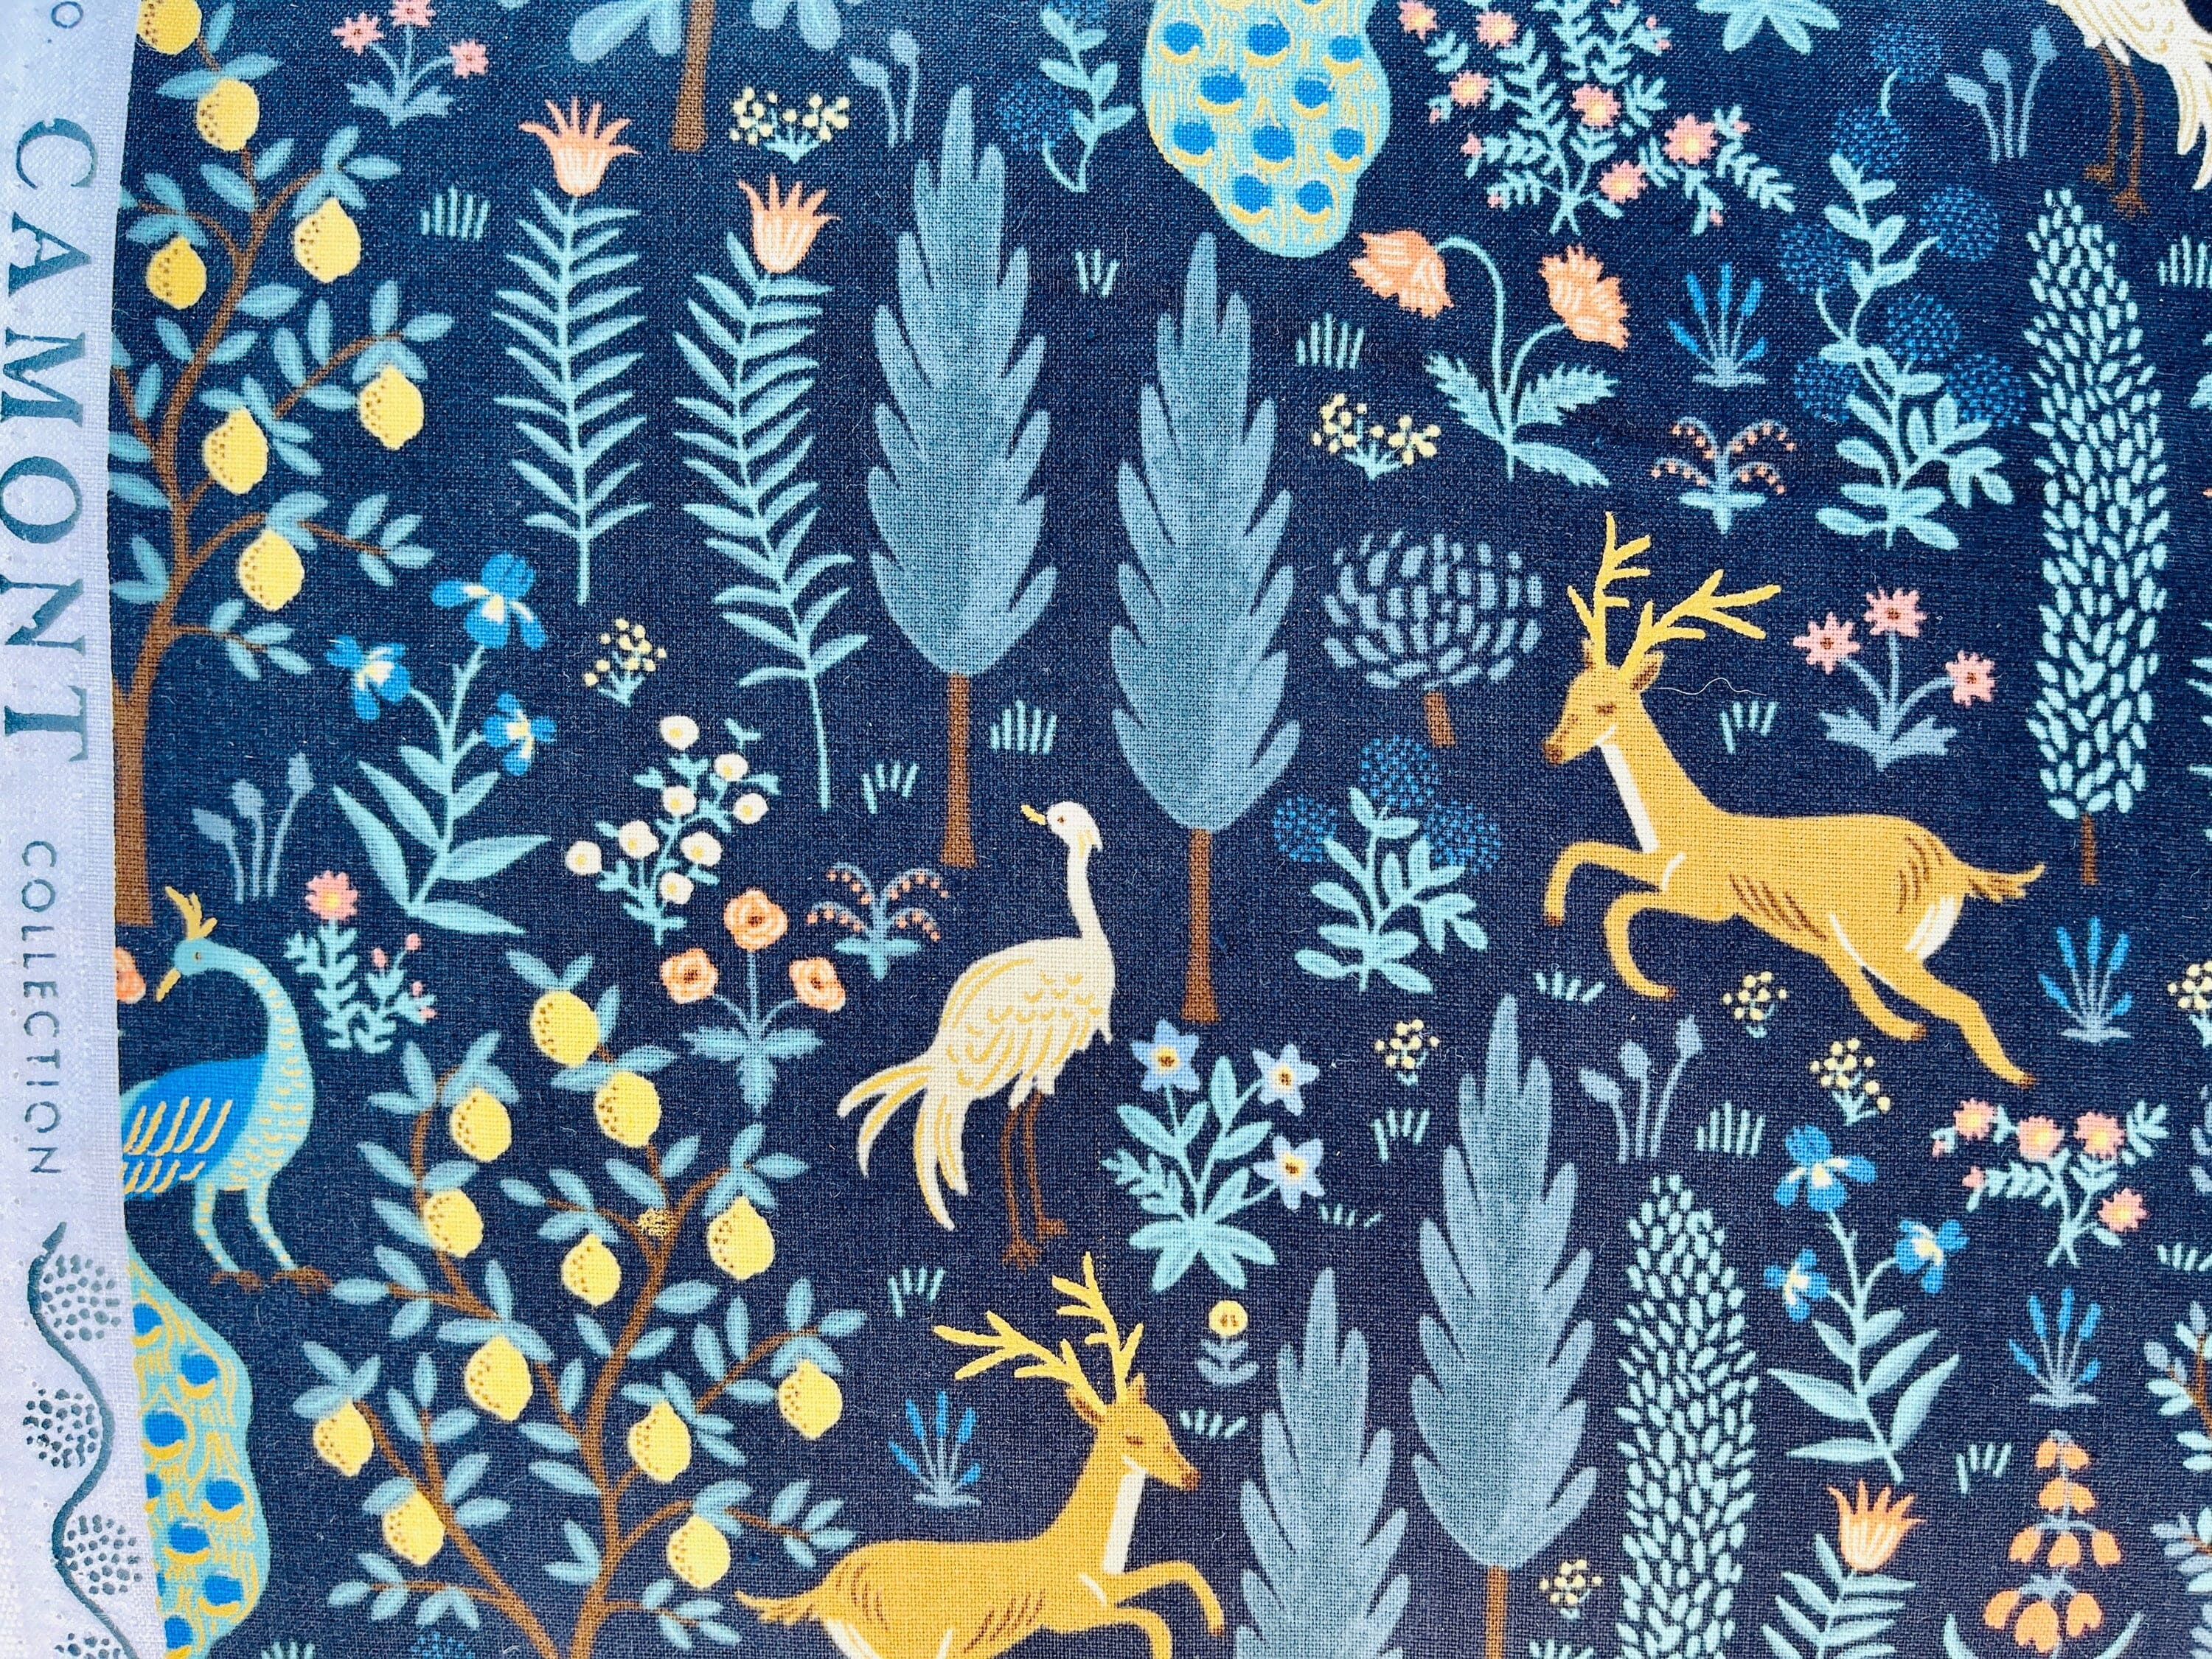 Camont - Menagerie - Black Metallic Fabric - Rifle Paper Co - Quilting Cotton Fabric - Cotton+ Steel - RP700-BK1M